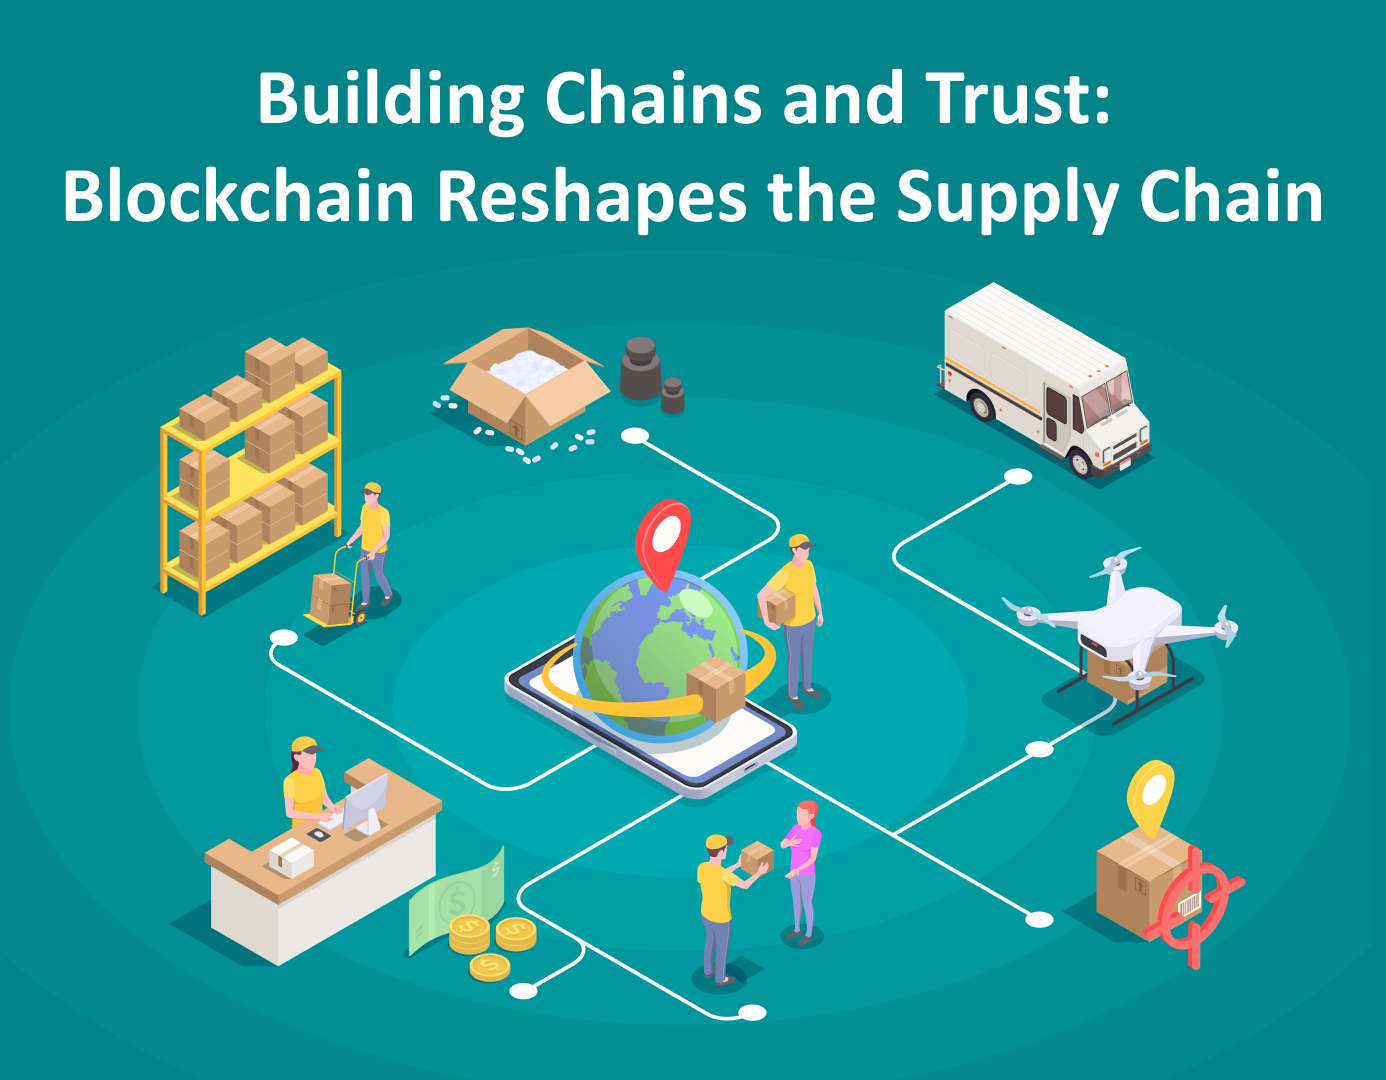 Blocks and chains visualize blockchain enhancing supply chain - transparency, traceability, efficiency, security.